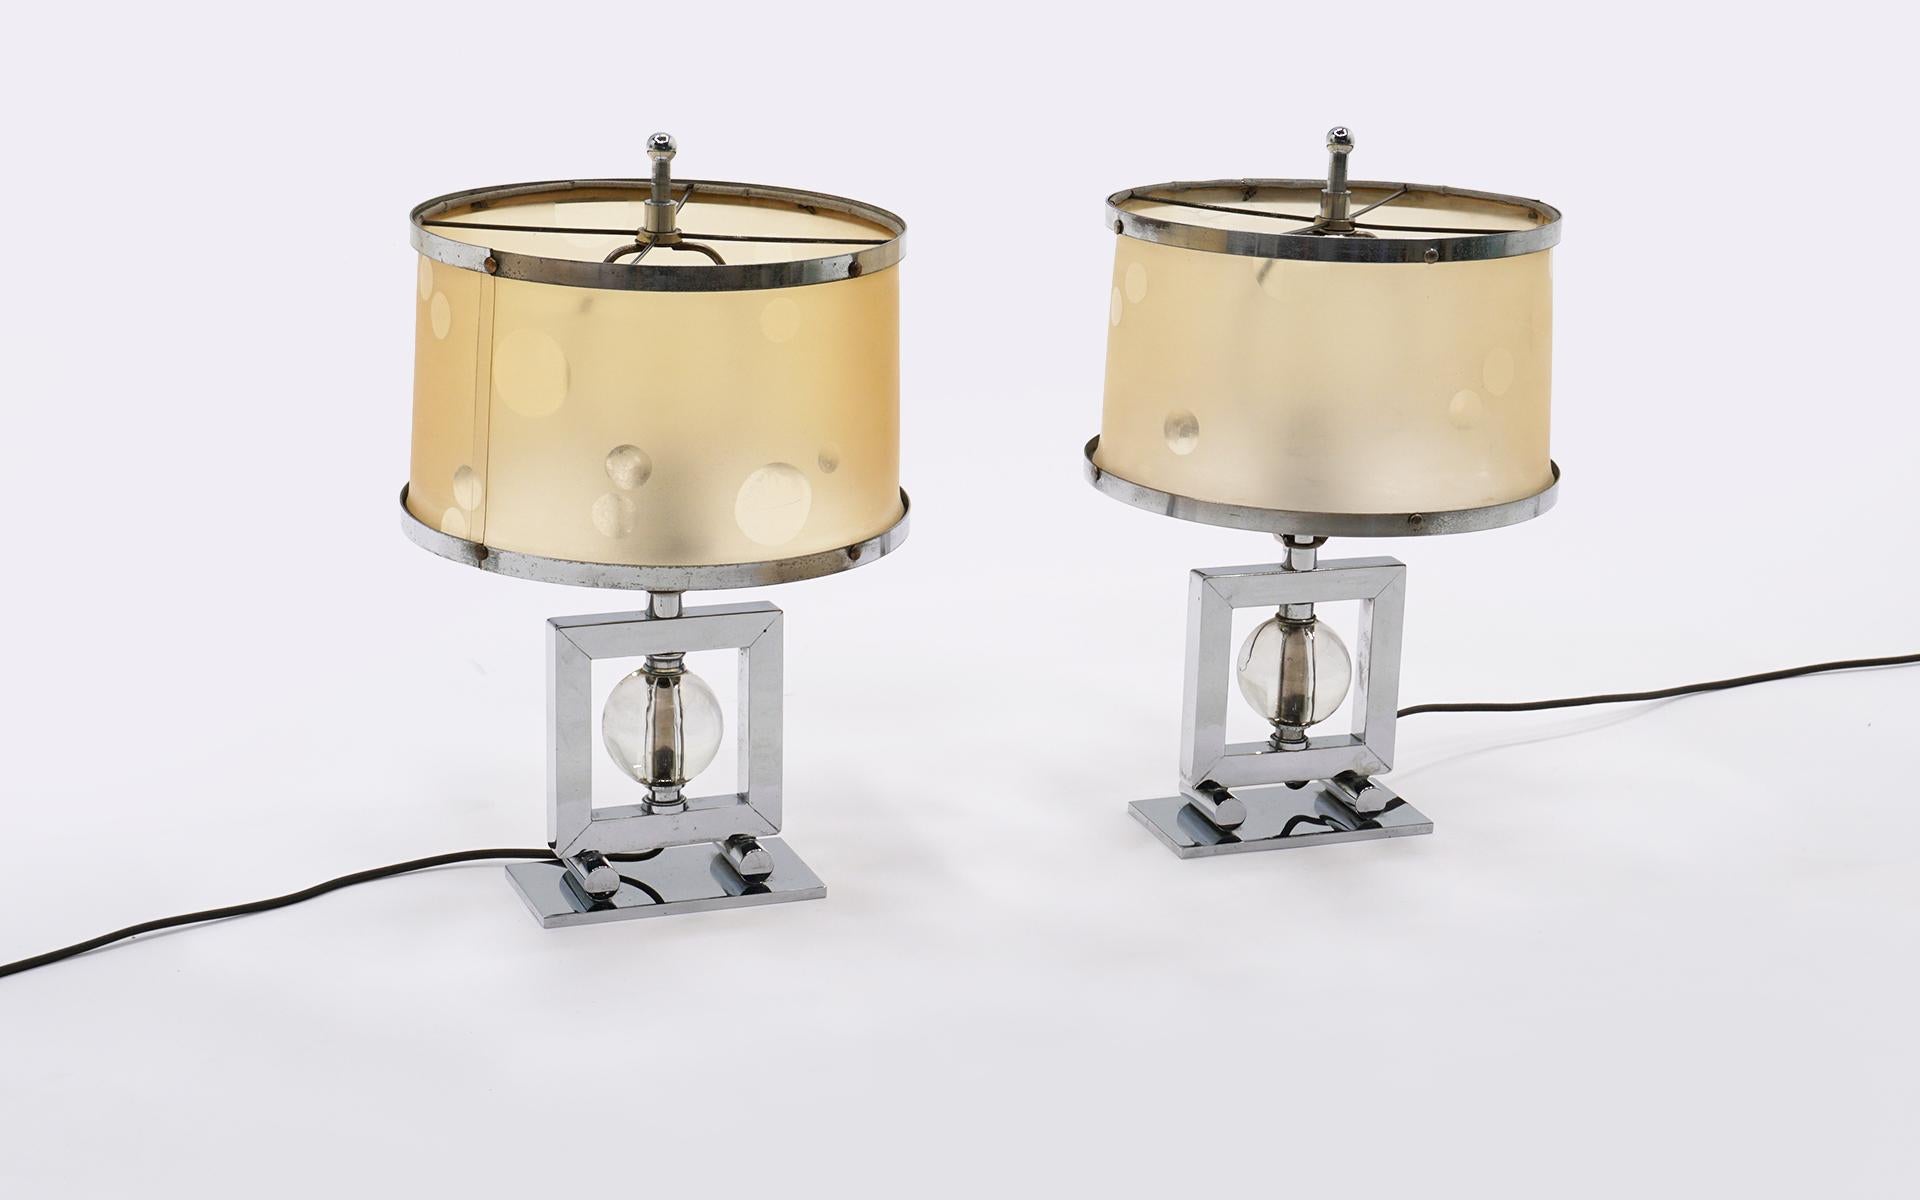 Rare pair of machine age table lamps. Chromed steel and glass. Awesome original shades with chrome trim. One shade has a one inch crack near the top that does not distract from the beauty of this highly desirable pair of lamps.